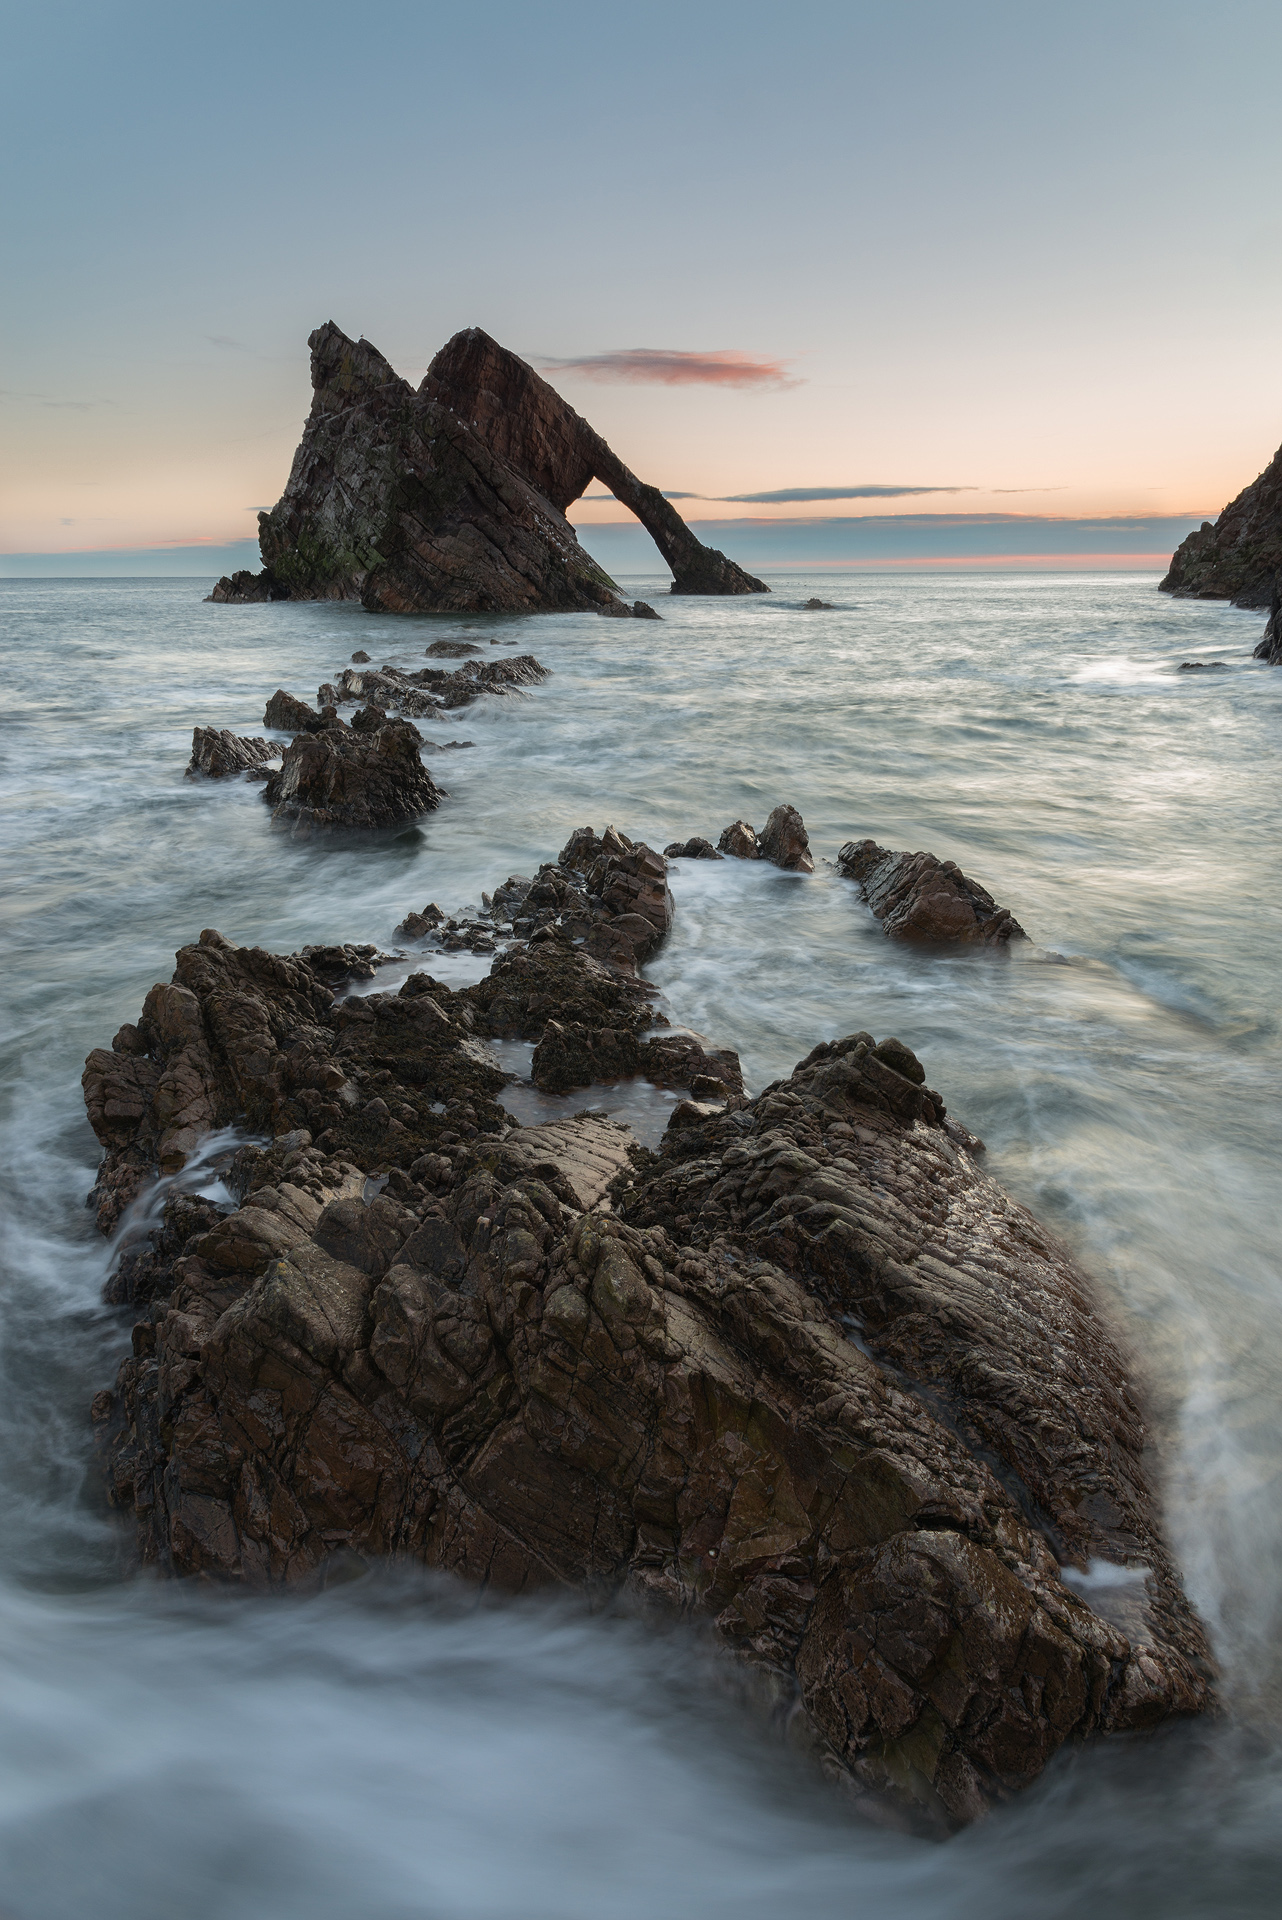 It’s a new day, Bow Fiddle Rock